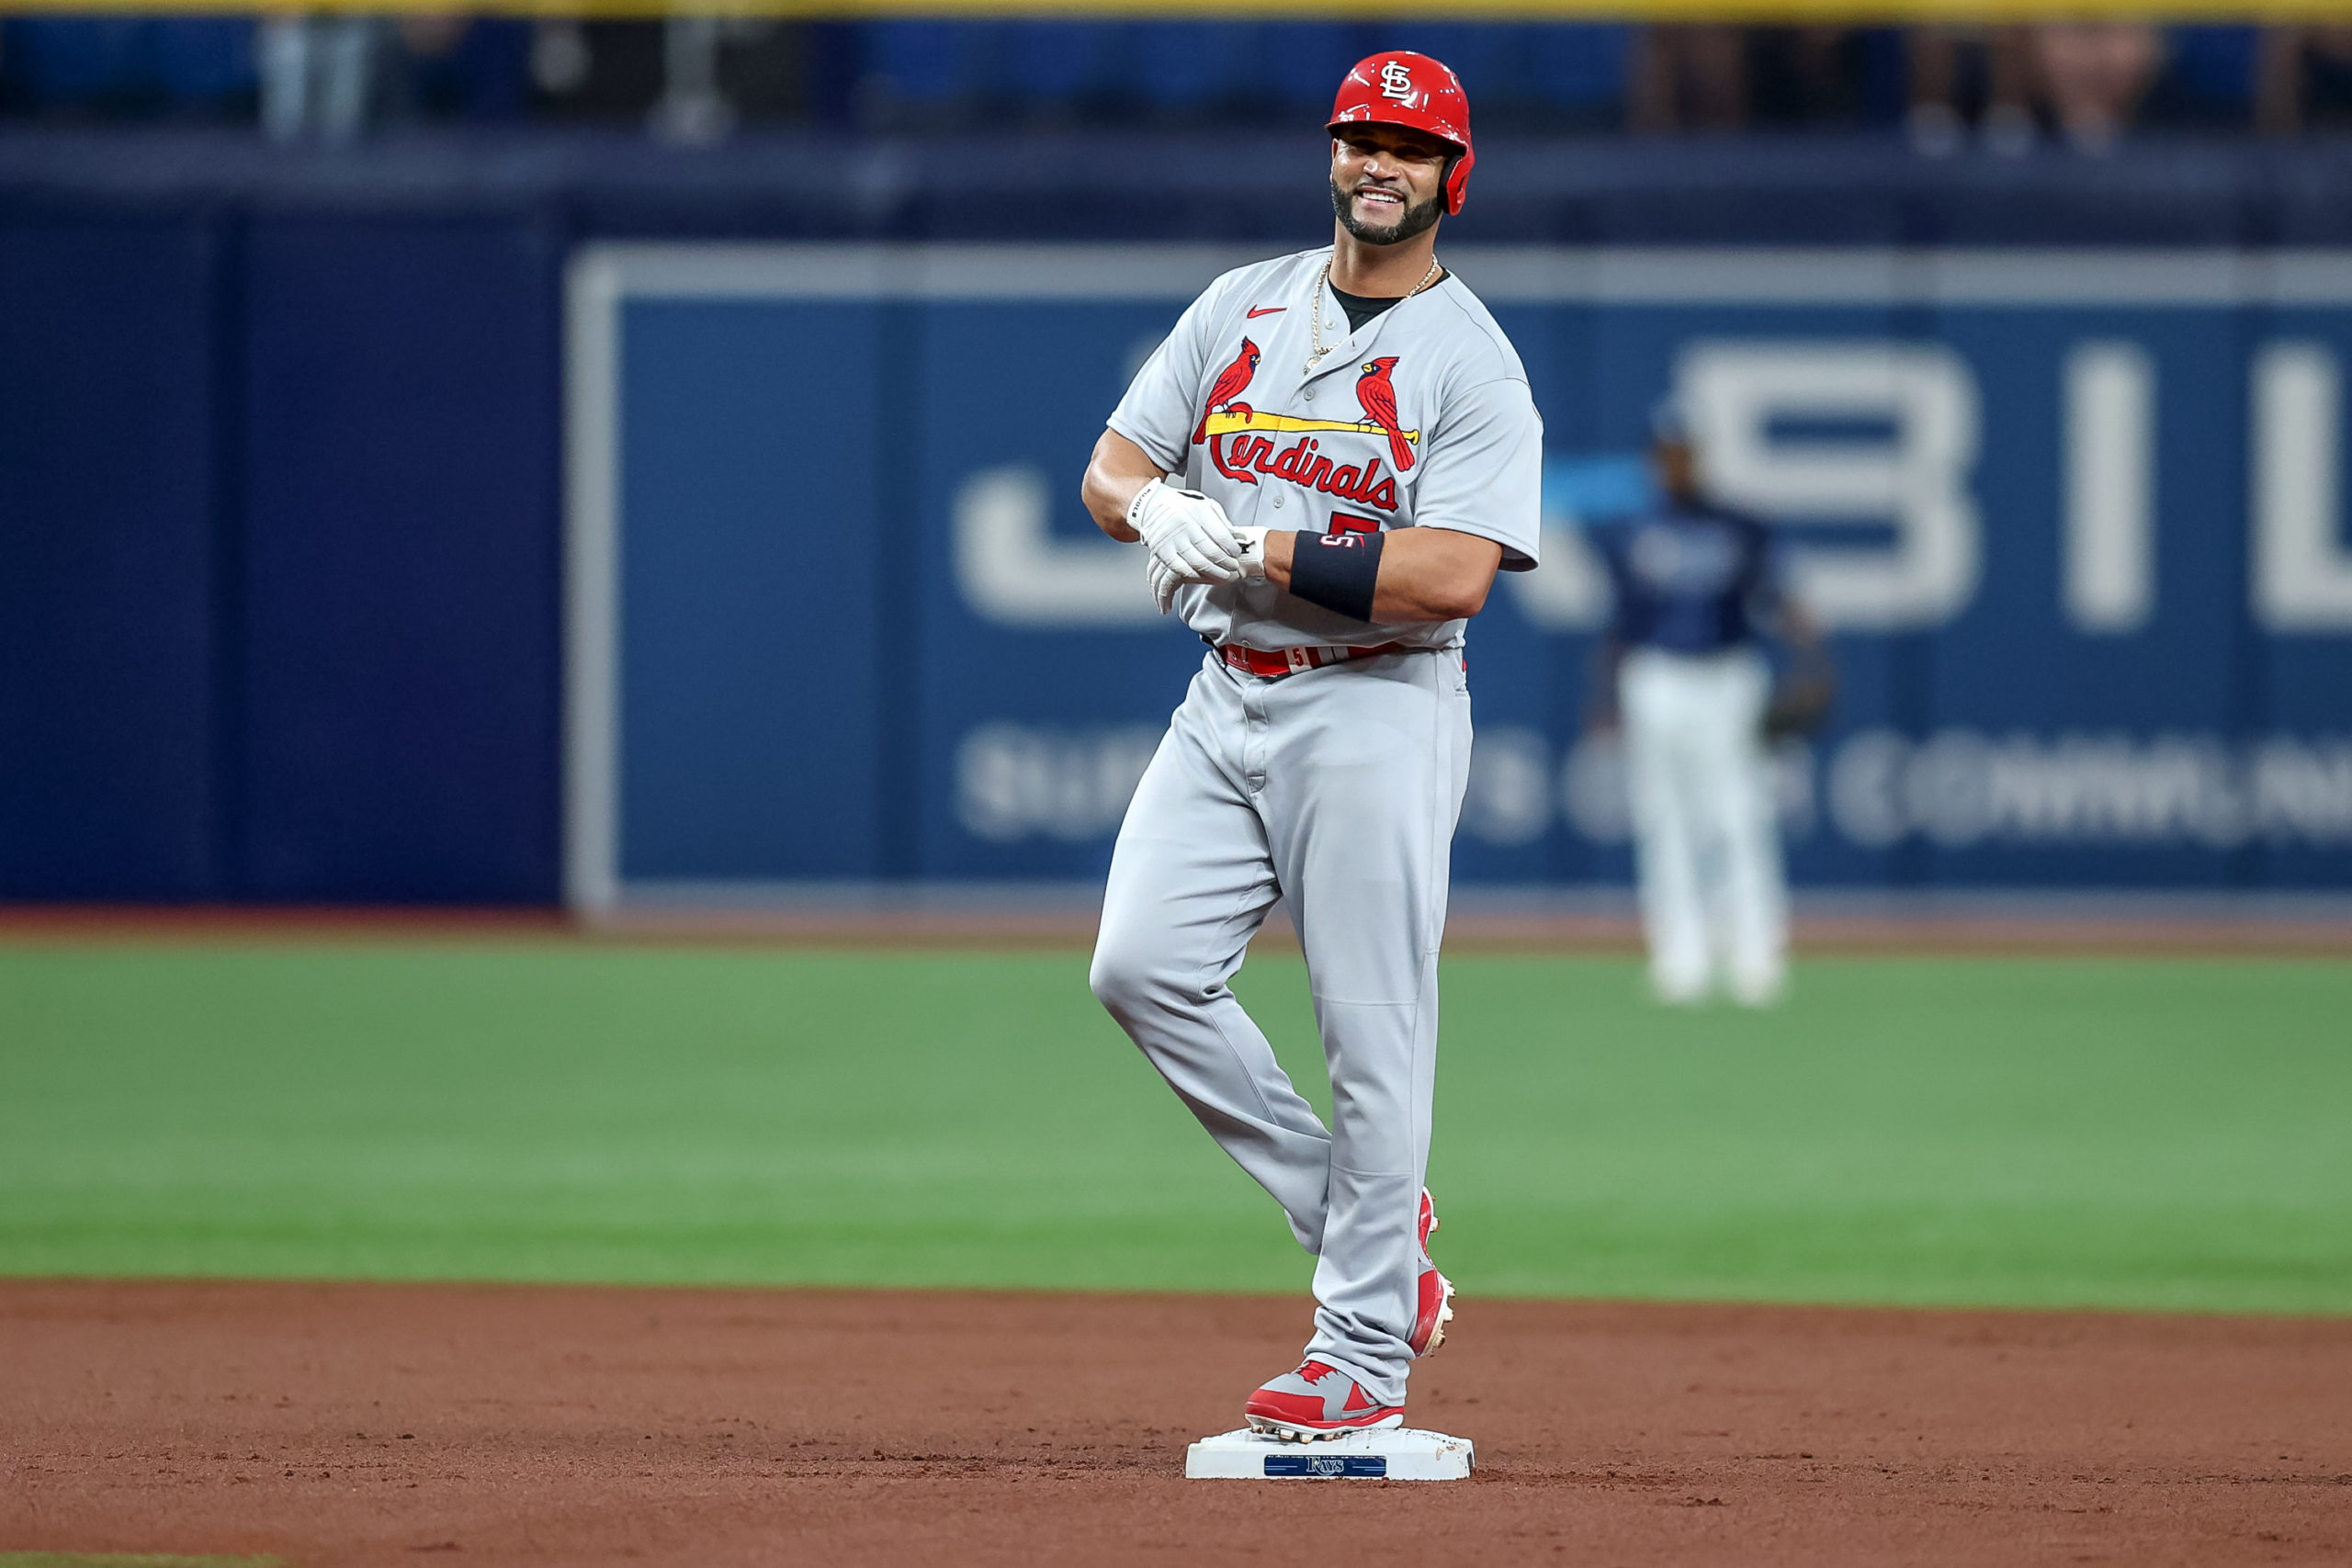 Pujols, Cabrera added to MLB All-Star rosters by Manfred